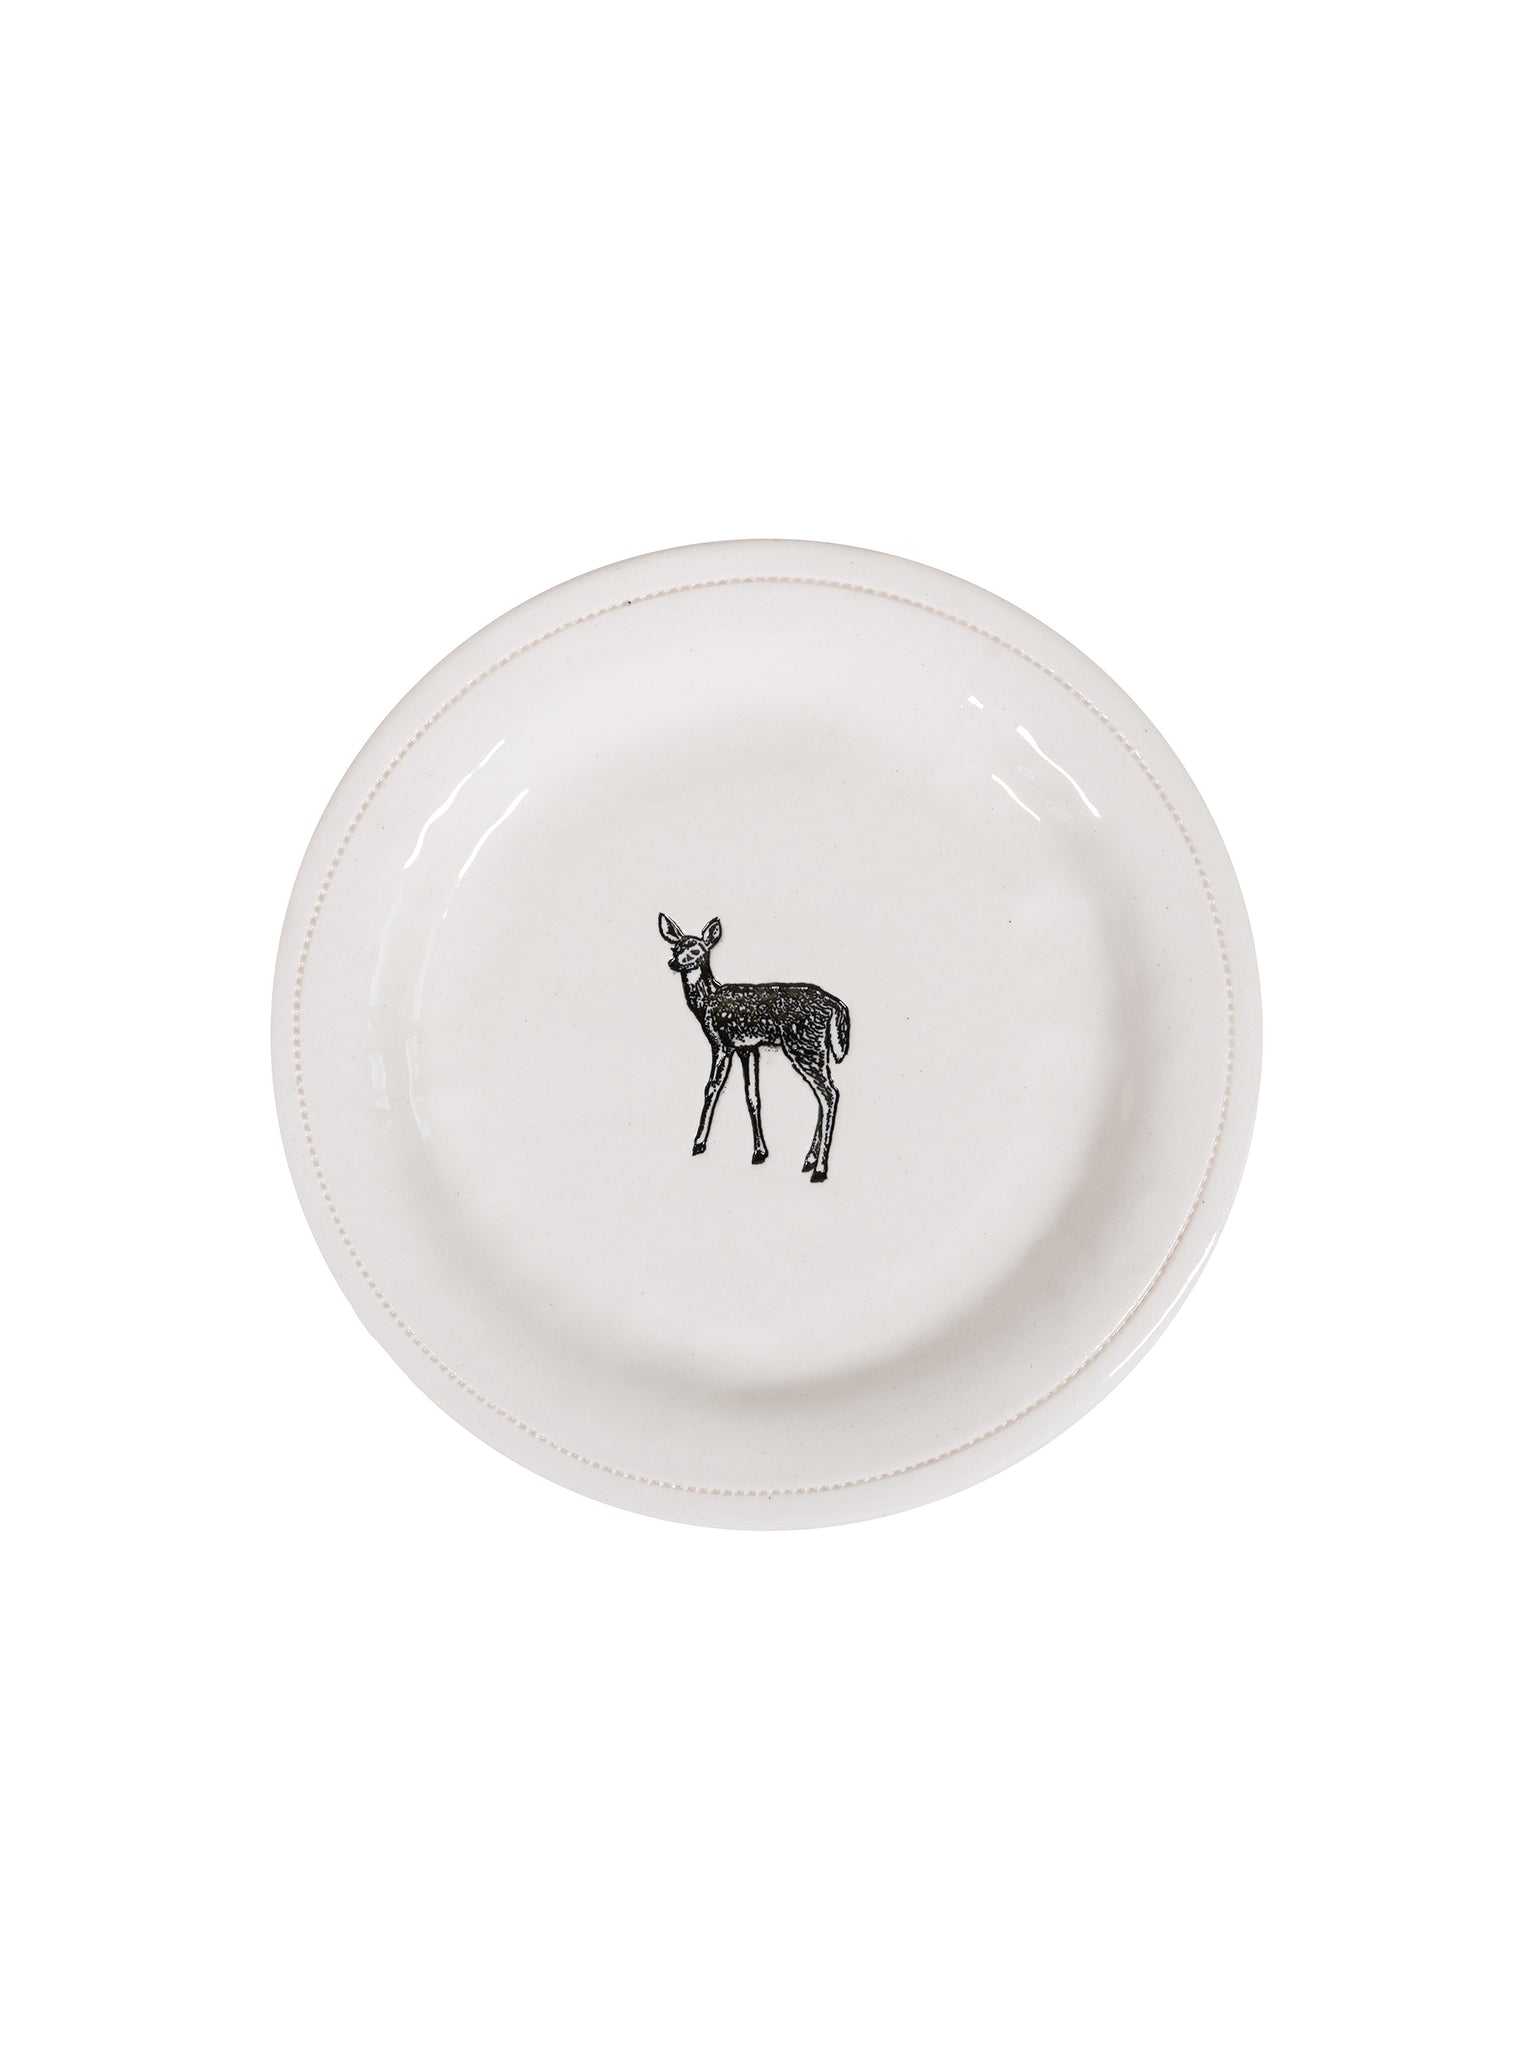 Fawn and Deer Canape Plate Set Weston Table